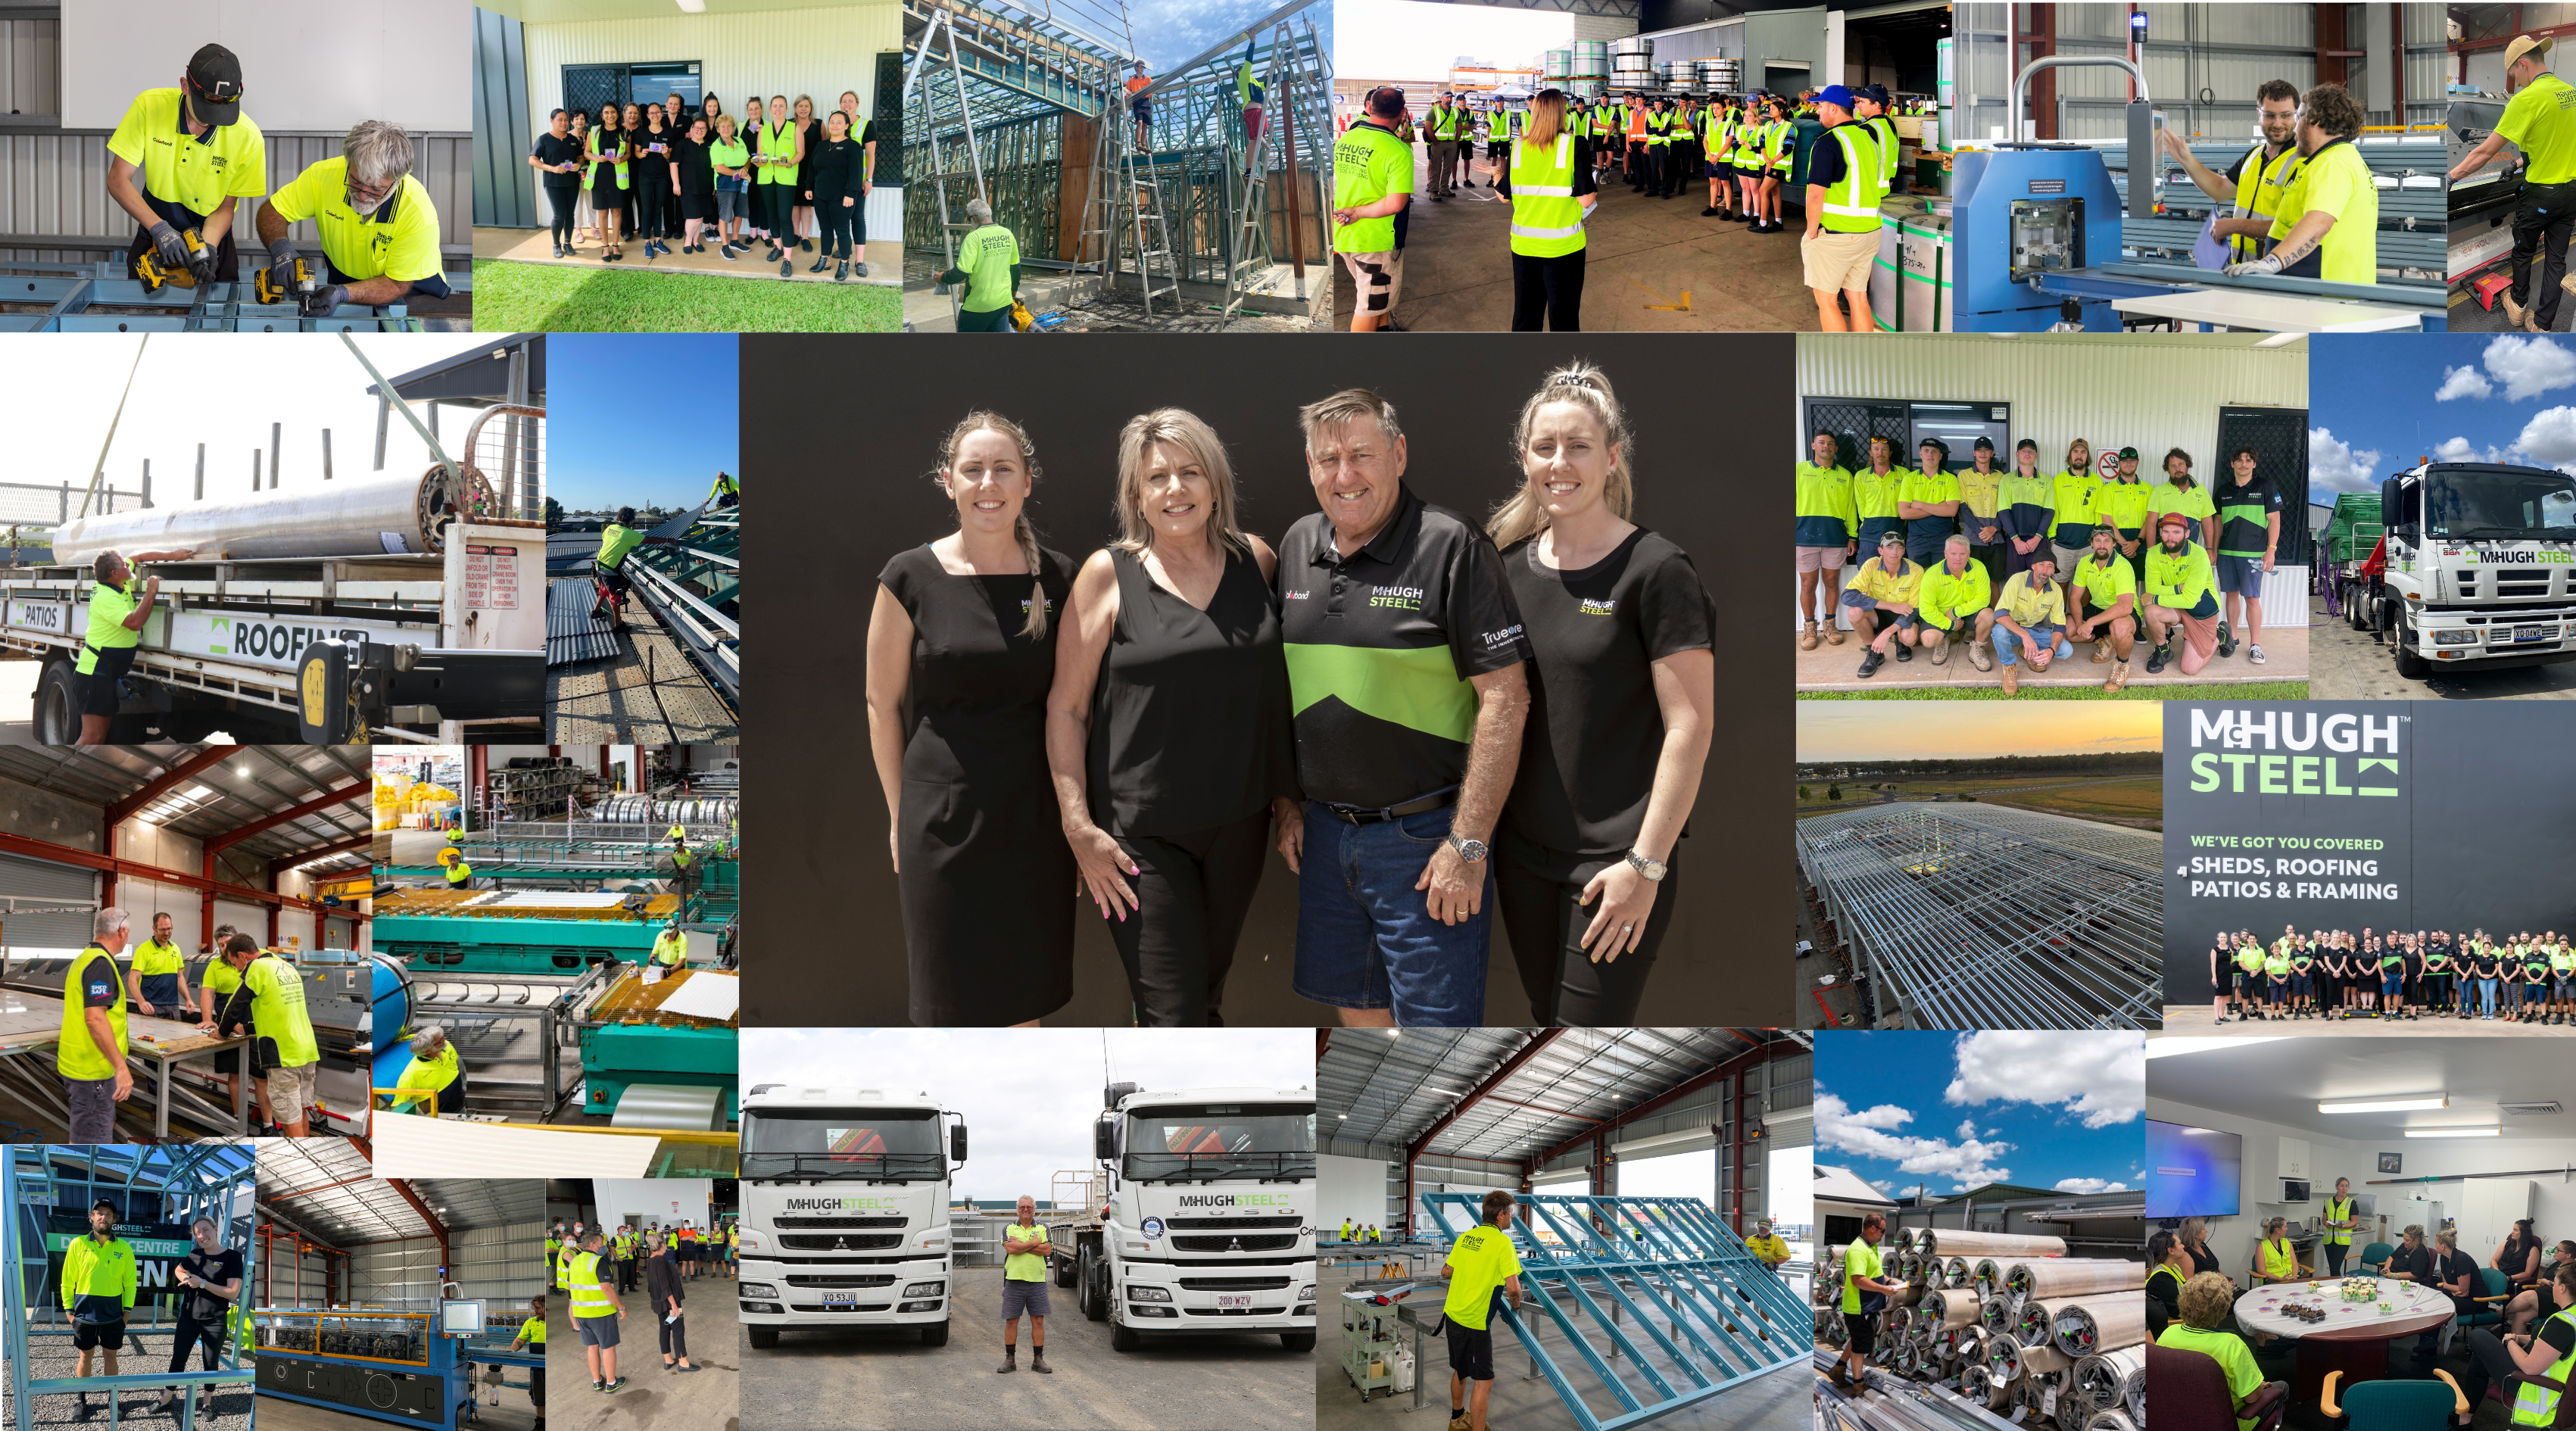 McHugh Steel collage of team and operations